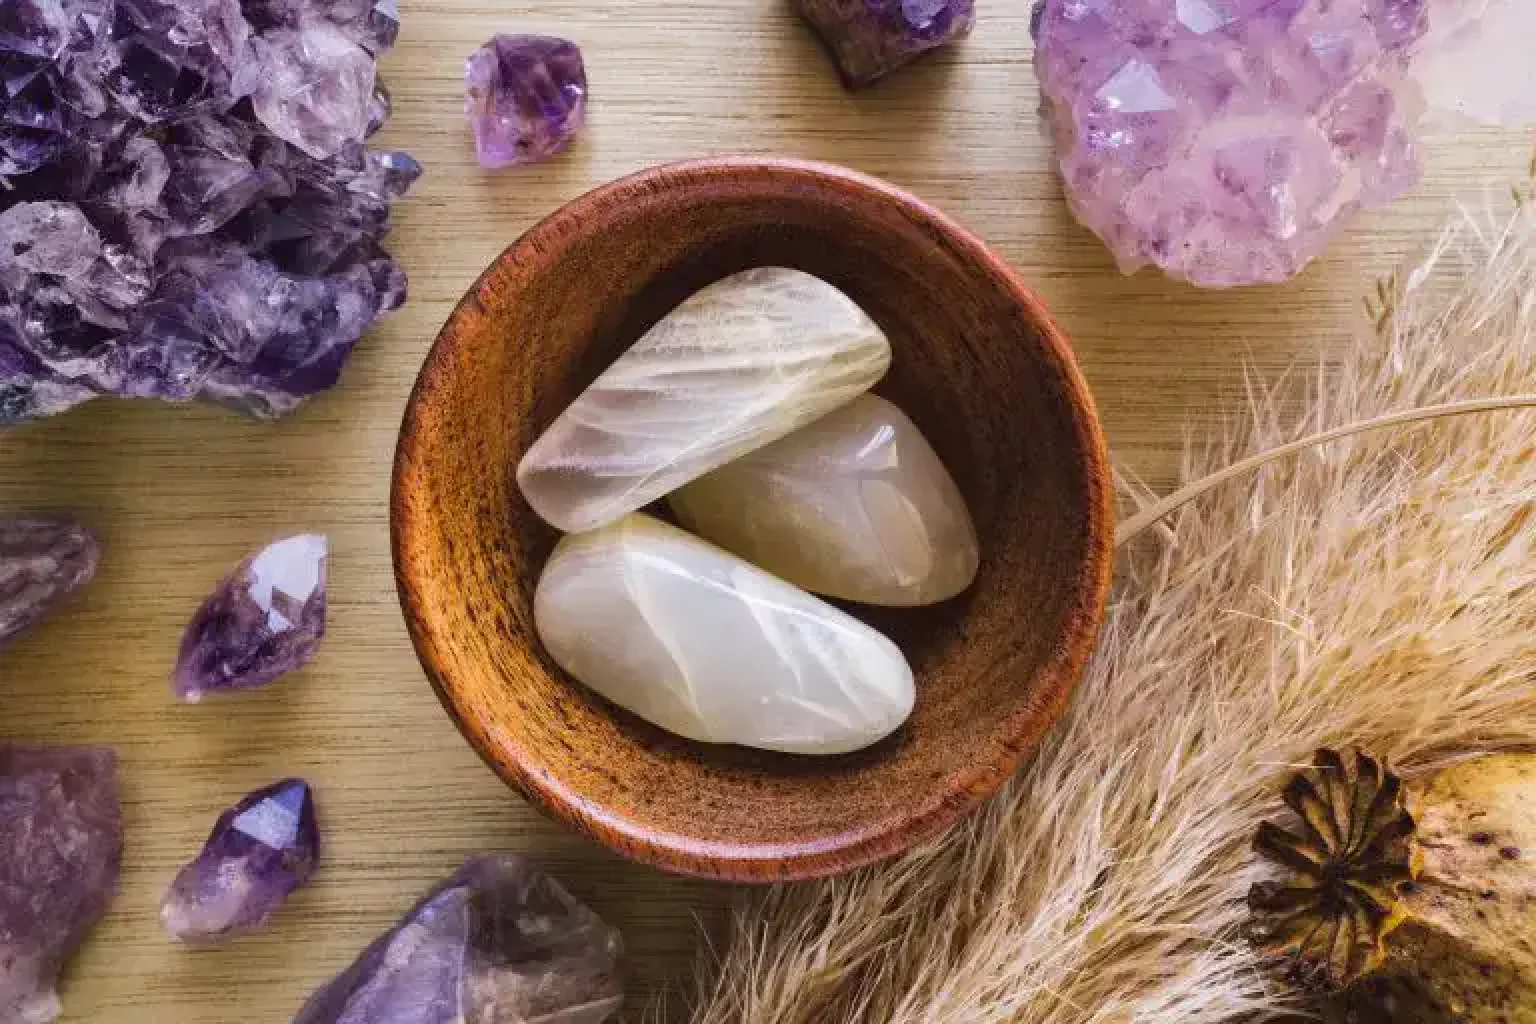 Moonstone crystals in a wooden bowl